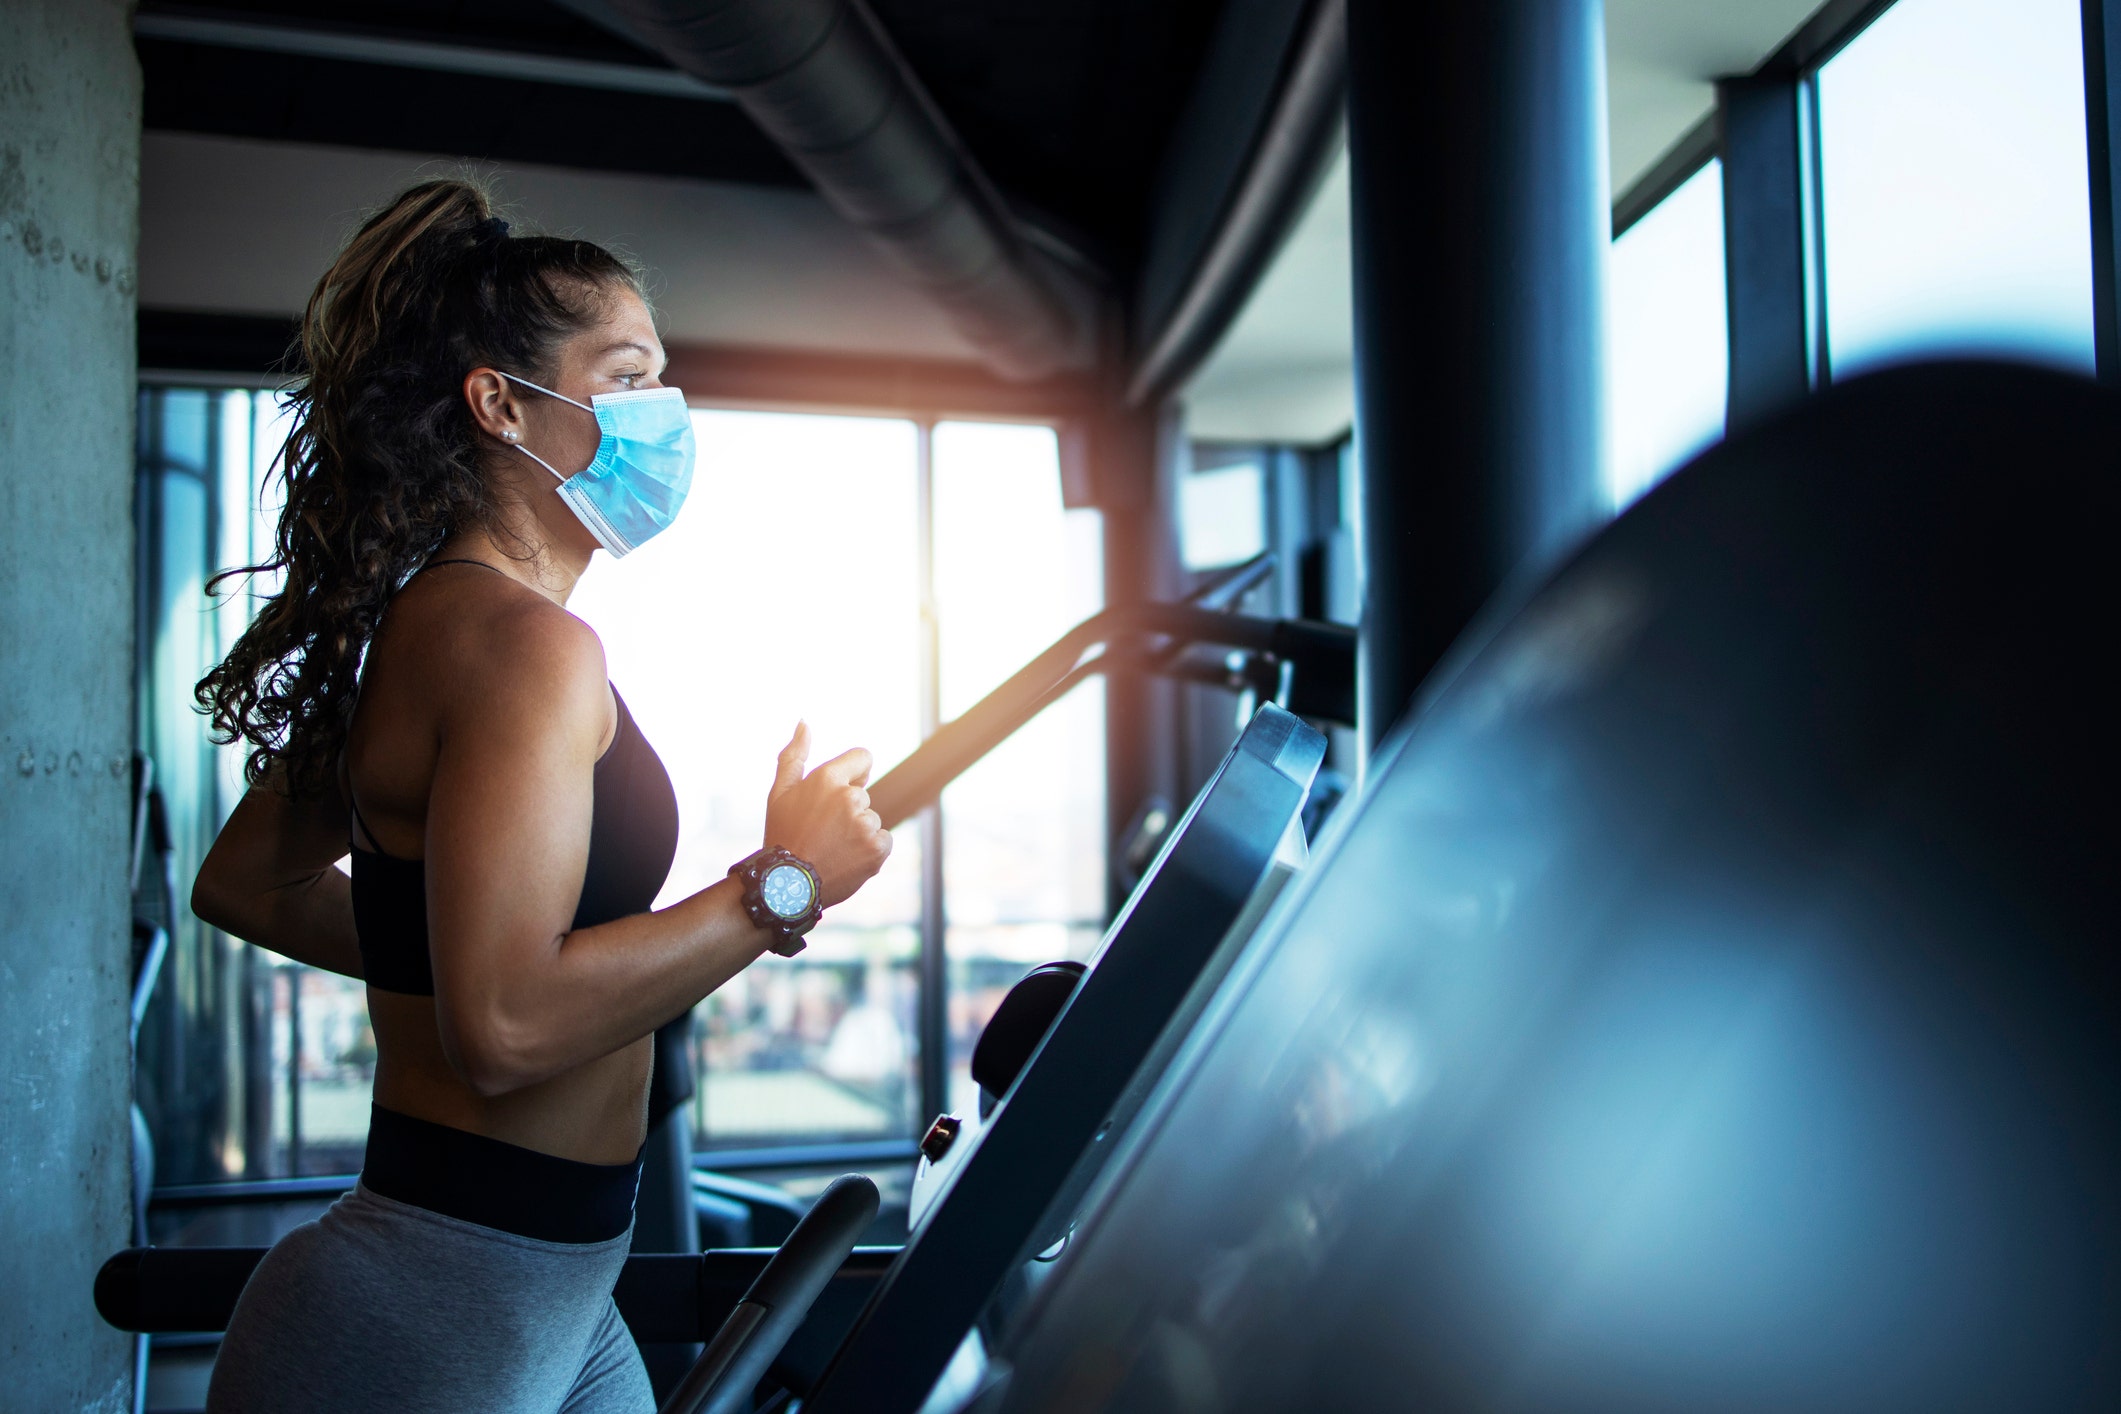 Coronavirus face mask use safe during intense exercise, early research suggests